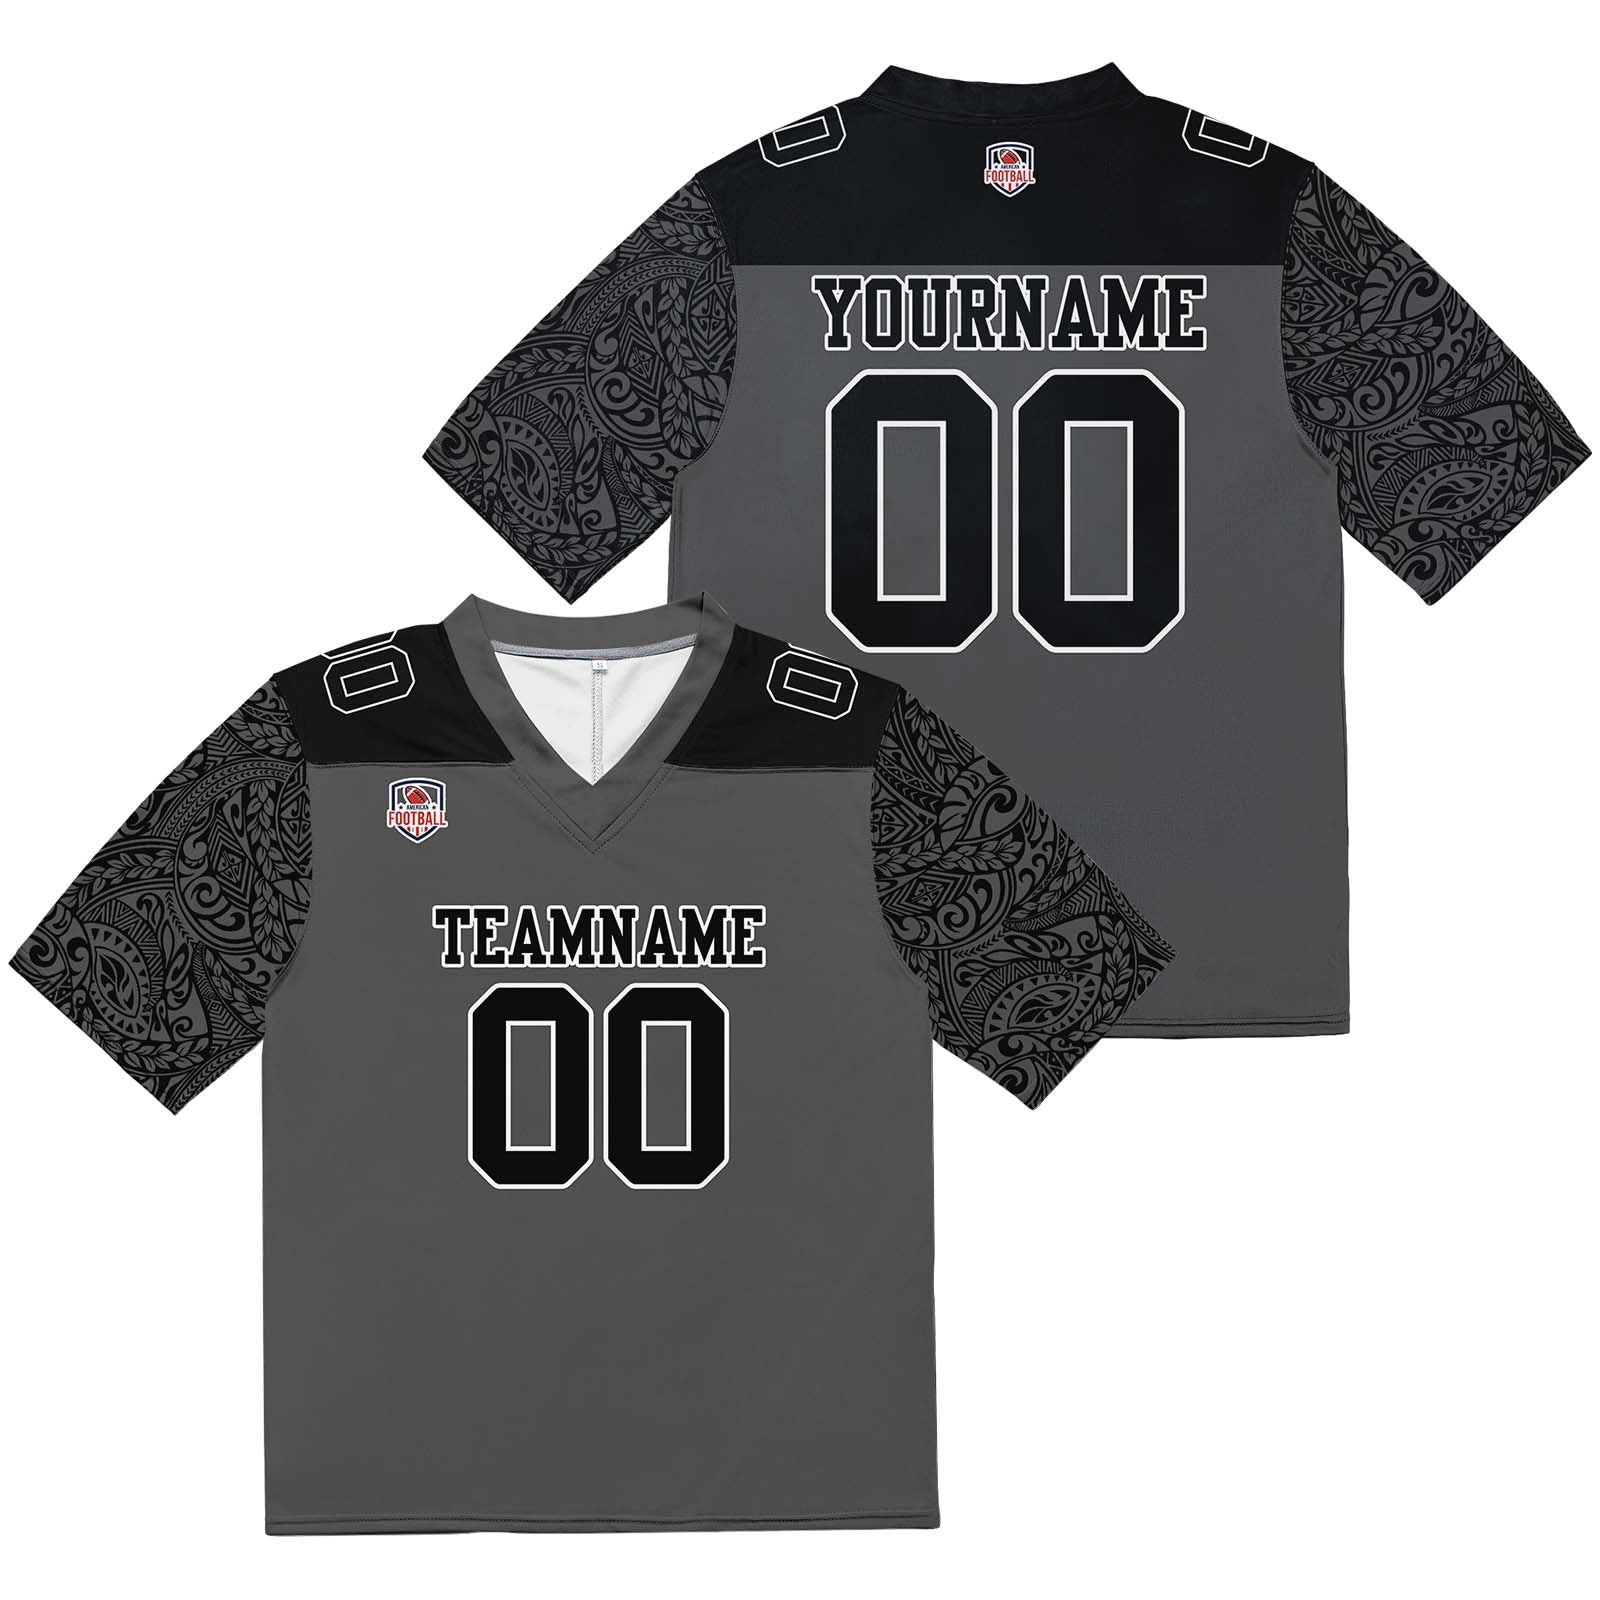 Custom Football Jersey Shirt Personalized Stitched Printed Team Name Number Black&Grey